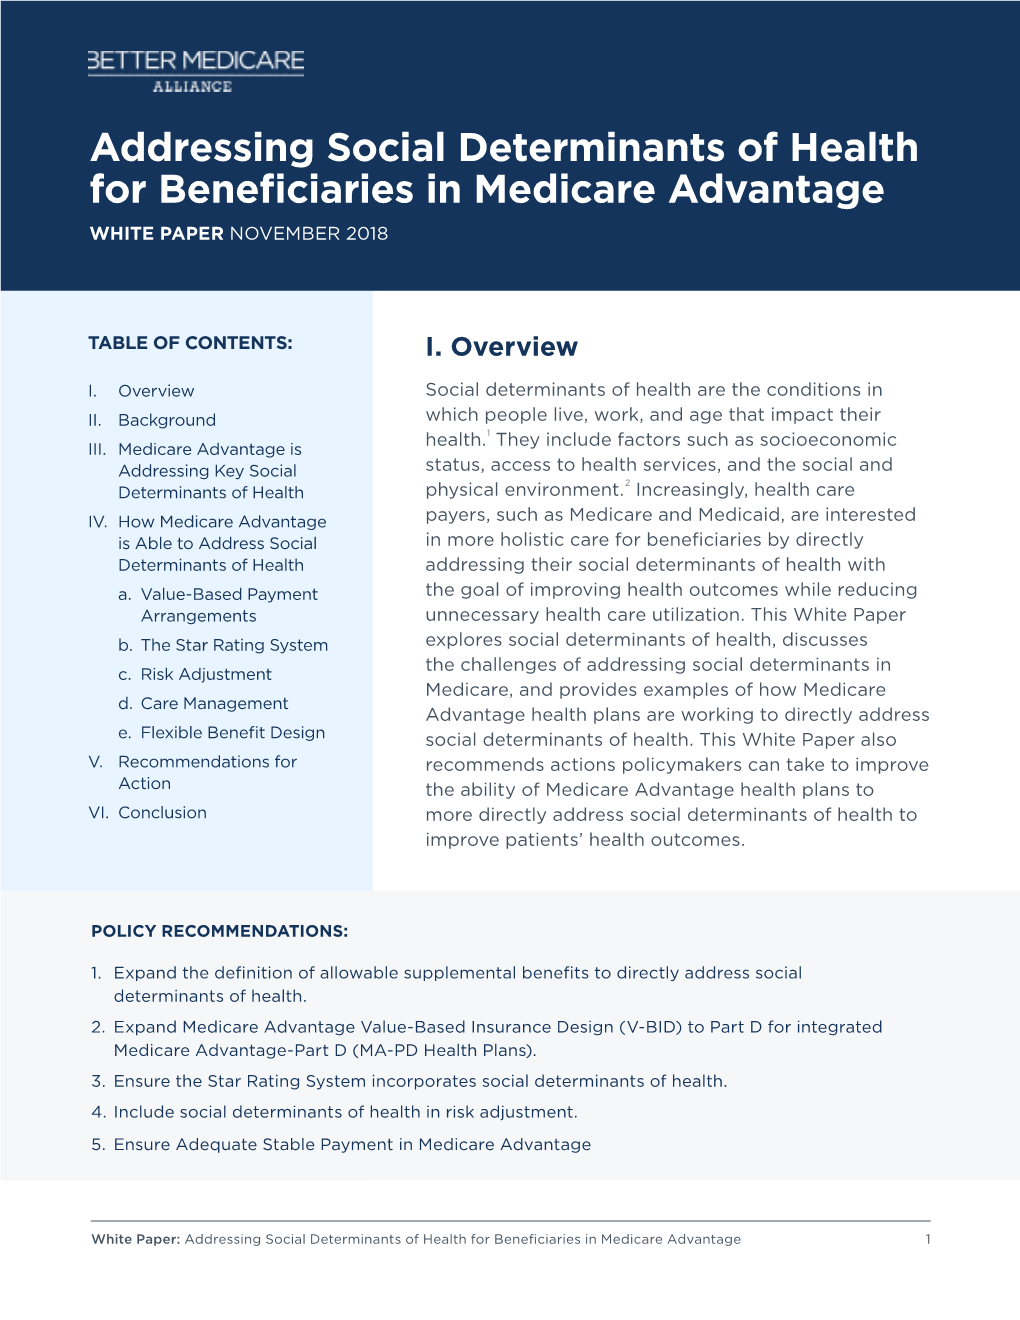 Addressing Social Determinants of Health for Beneficiaries in Medicare Advantage WHITE PAPER NOVEMBER 2018